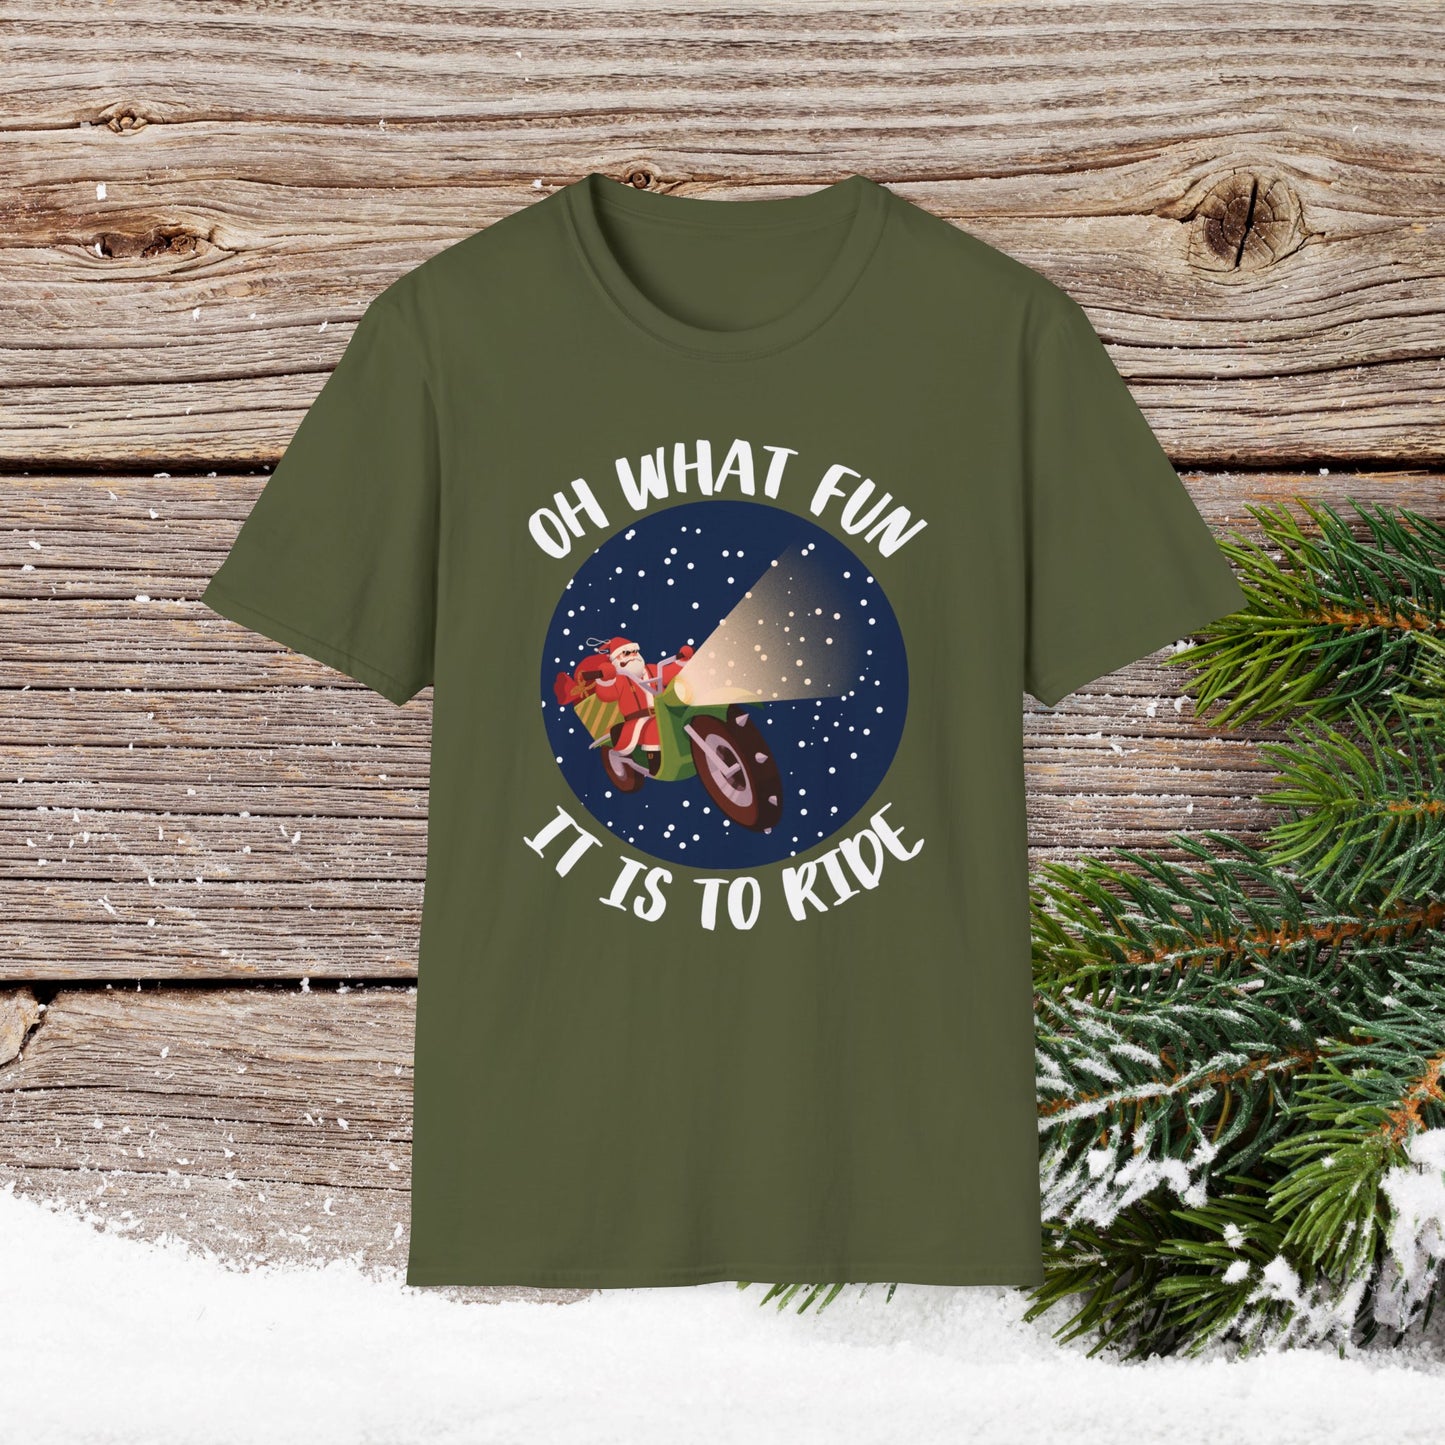 Christmas T-Shirt - Oh What Fun It Is To Ride - Mens anc Boys Christmas Shirts - Youth and Adult Christmas TShirts T-Shirts Graphic Avenue Military Green Adult Small 